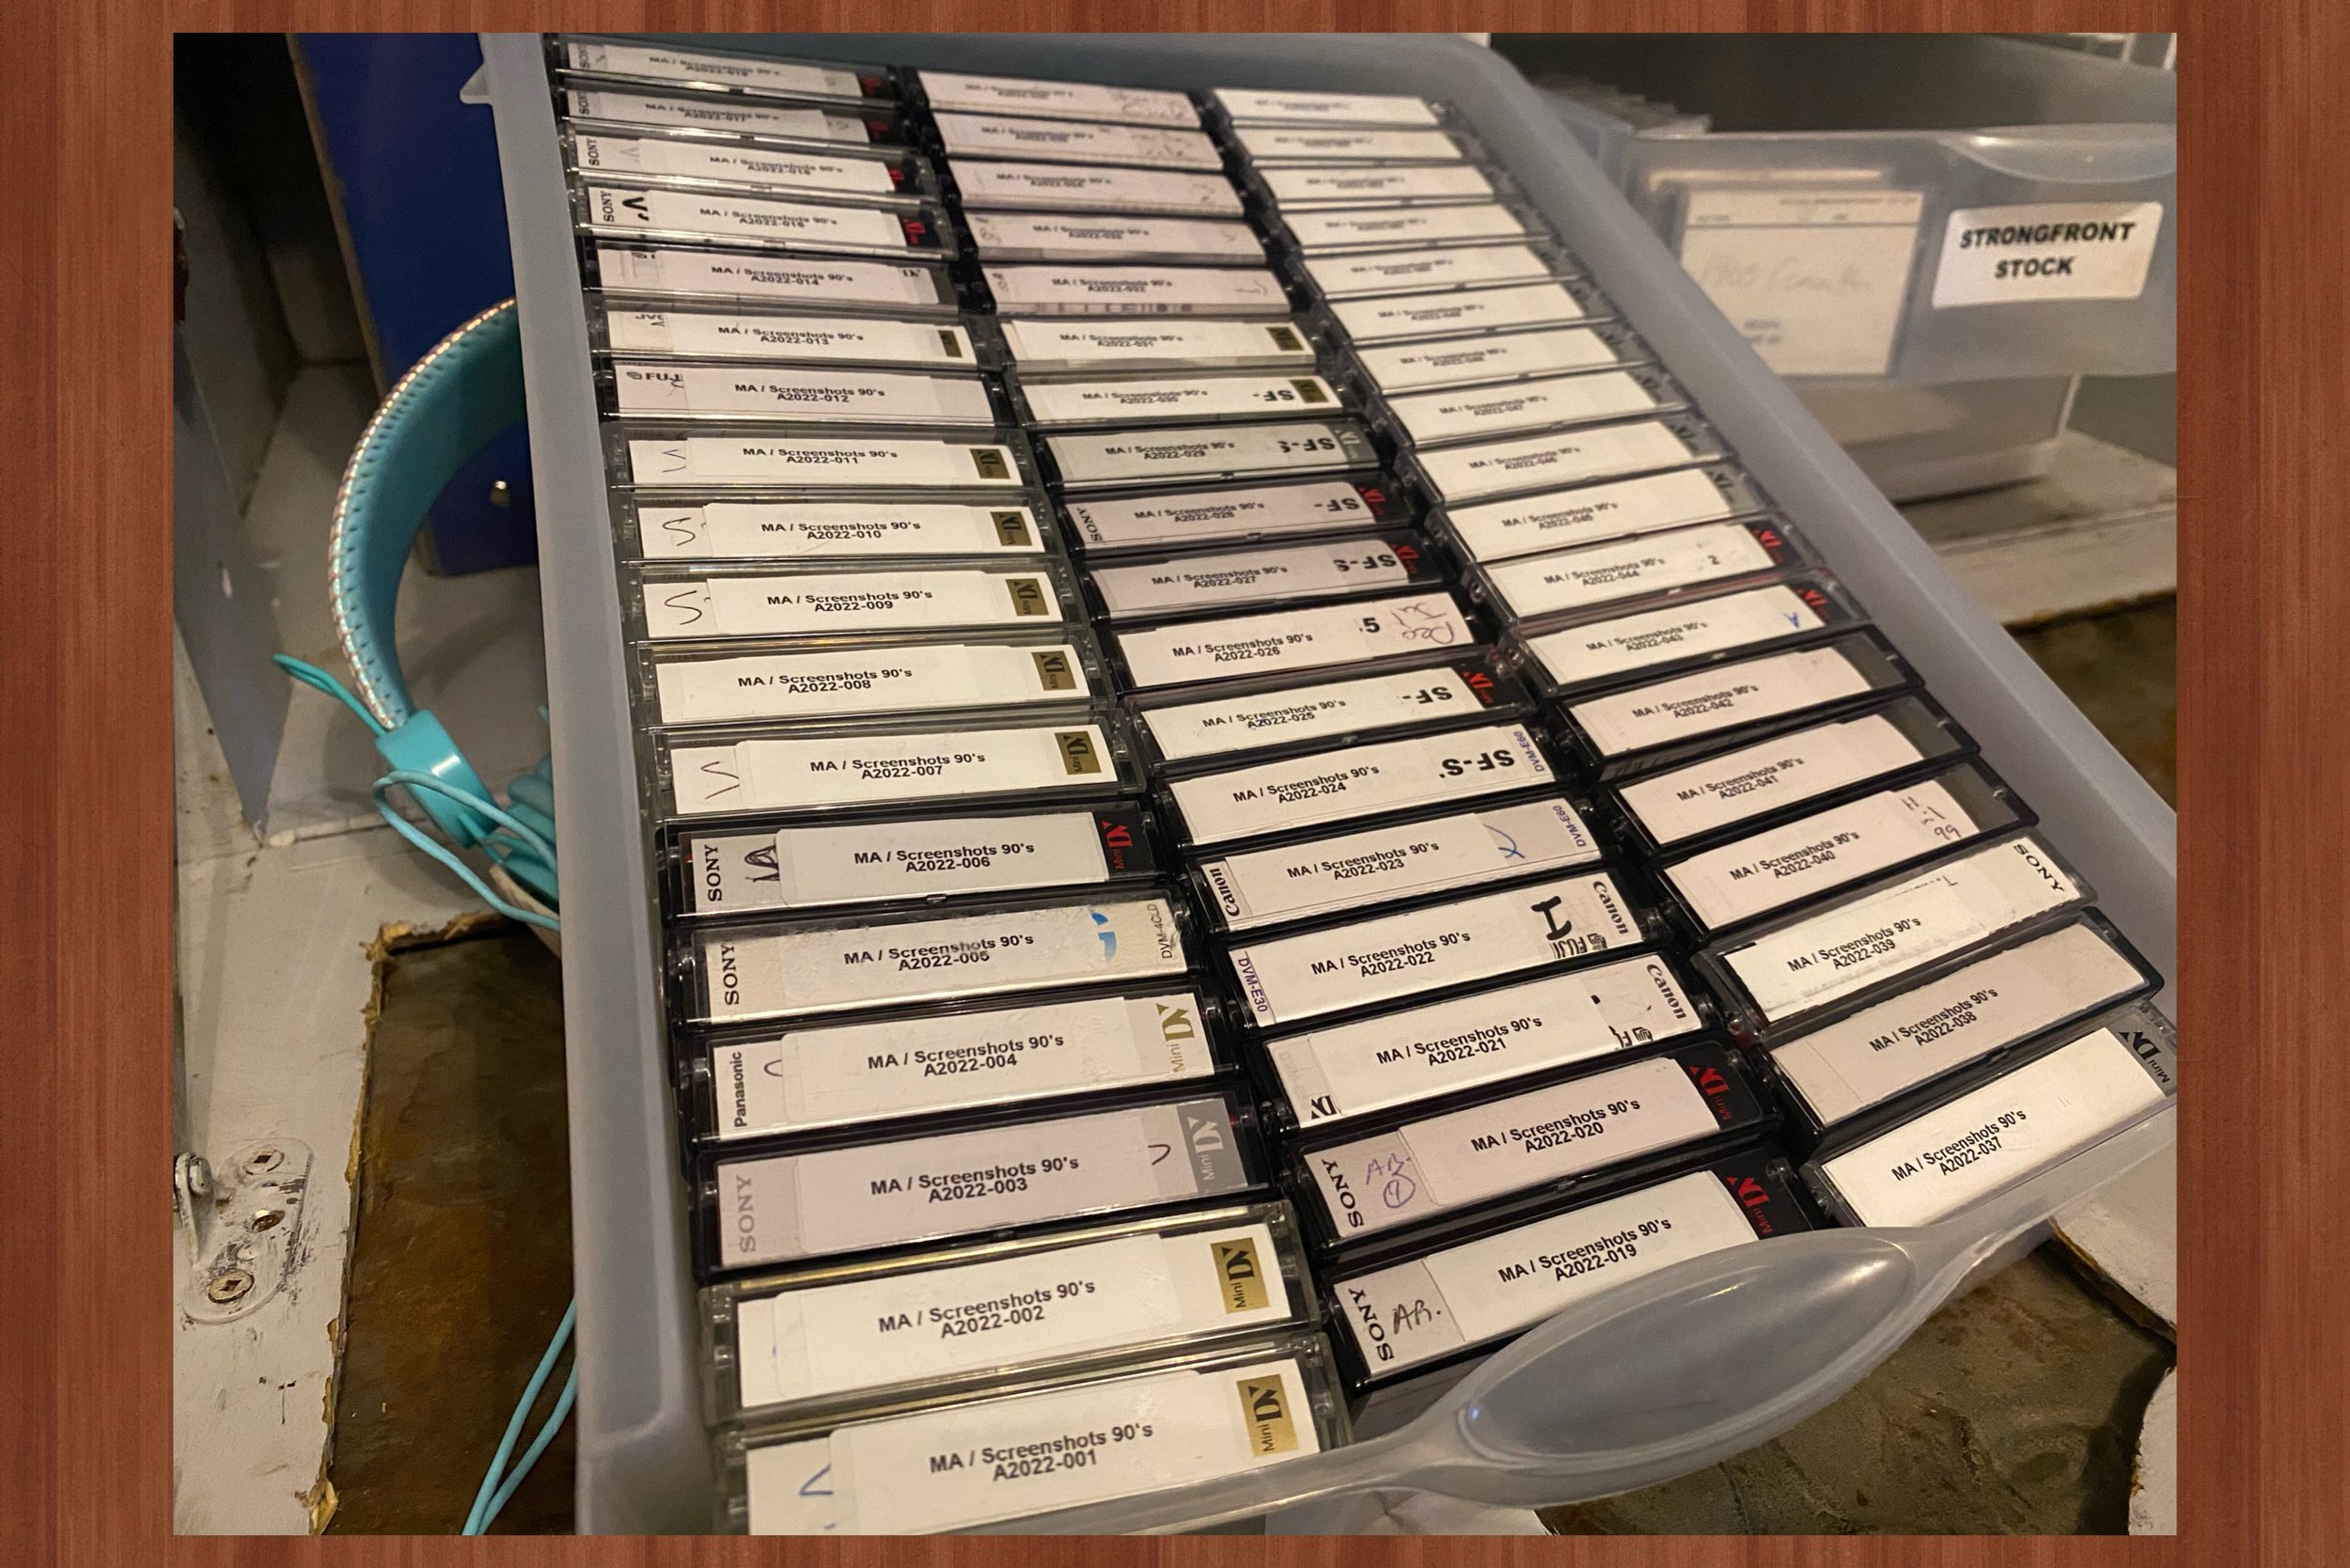  Arranging and describing 100+ hours or 150+ tapes that date back to 1996.&nbsp; 